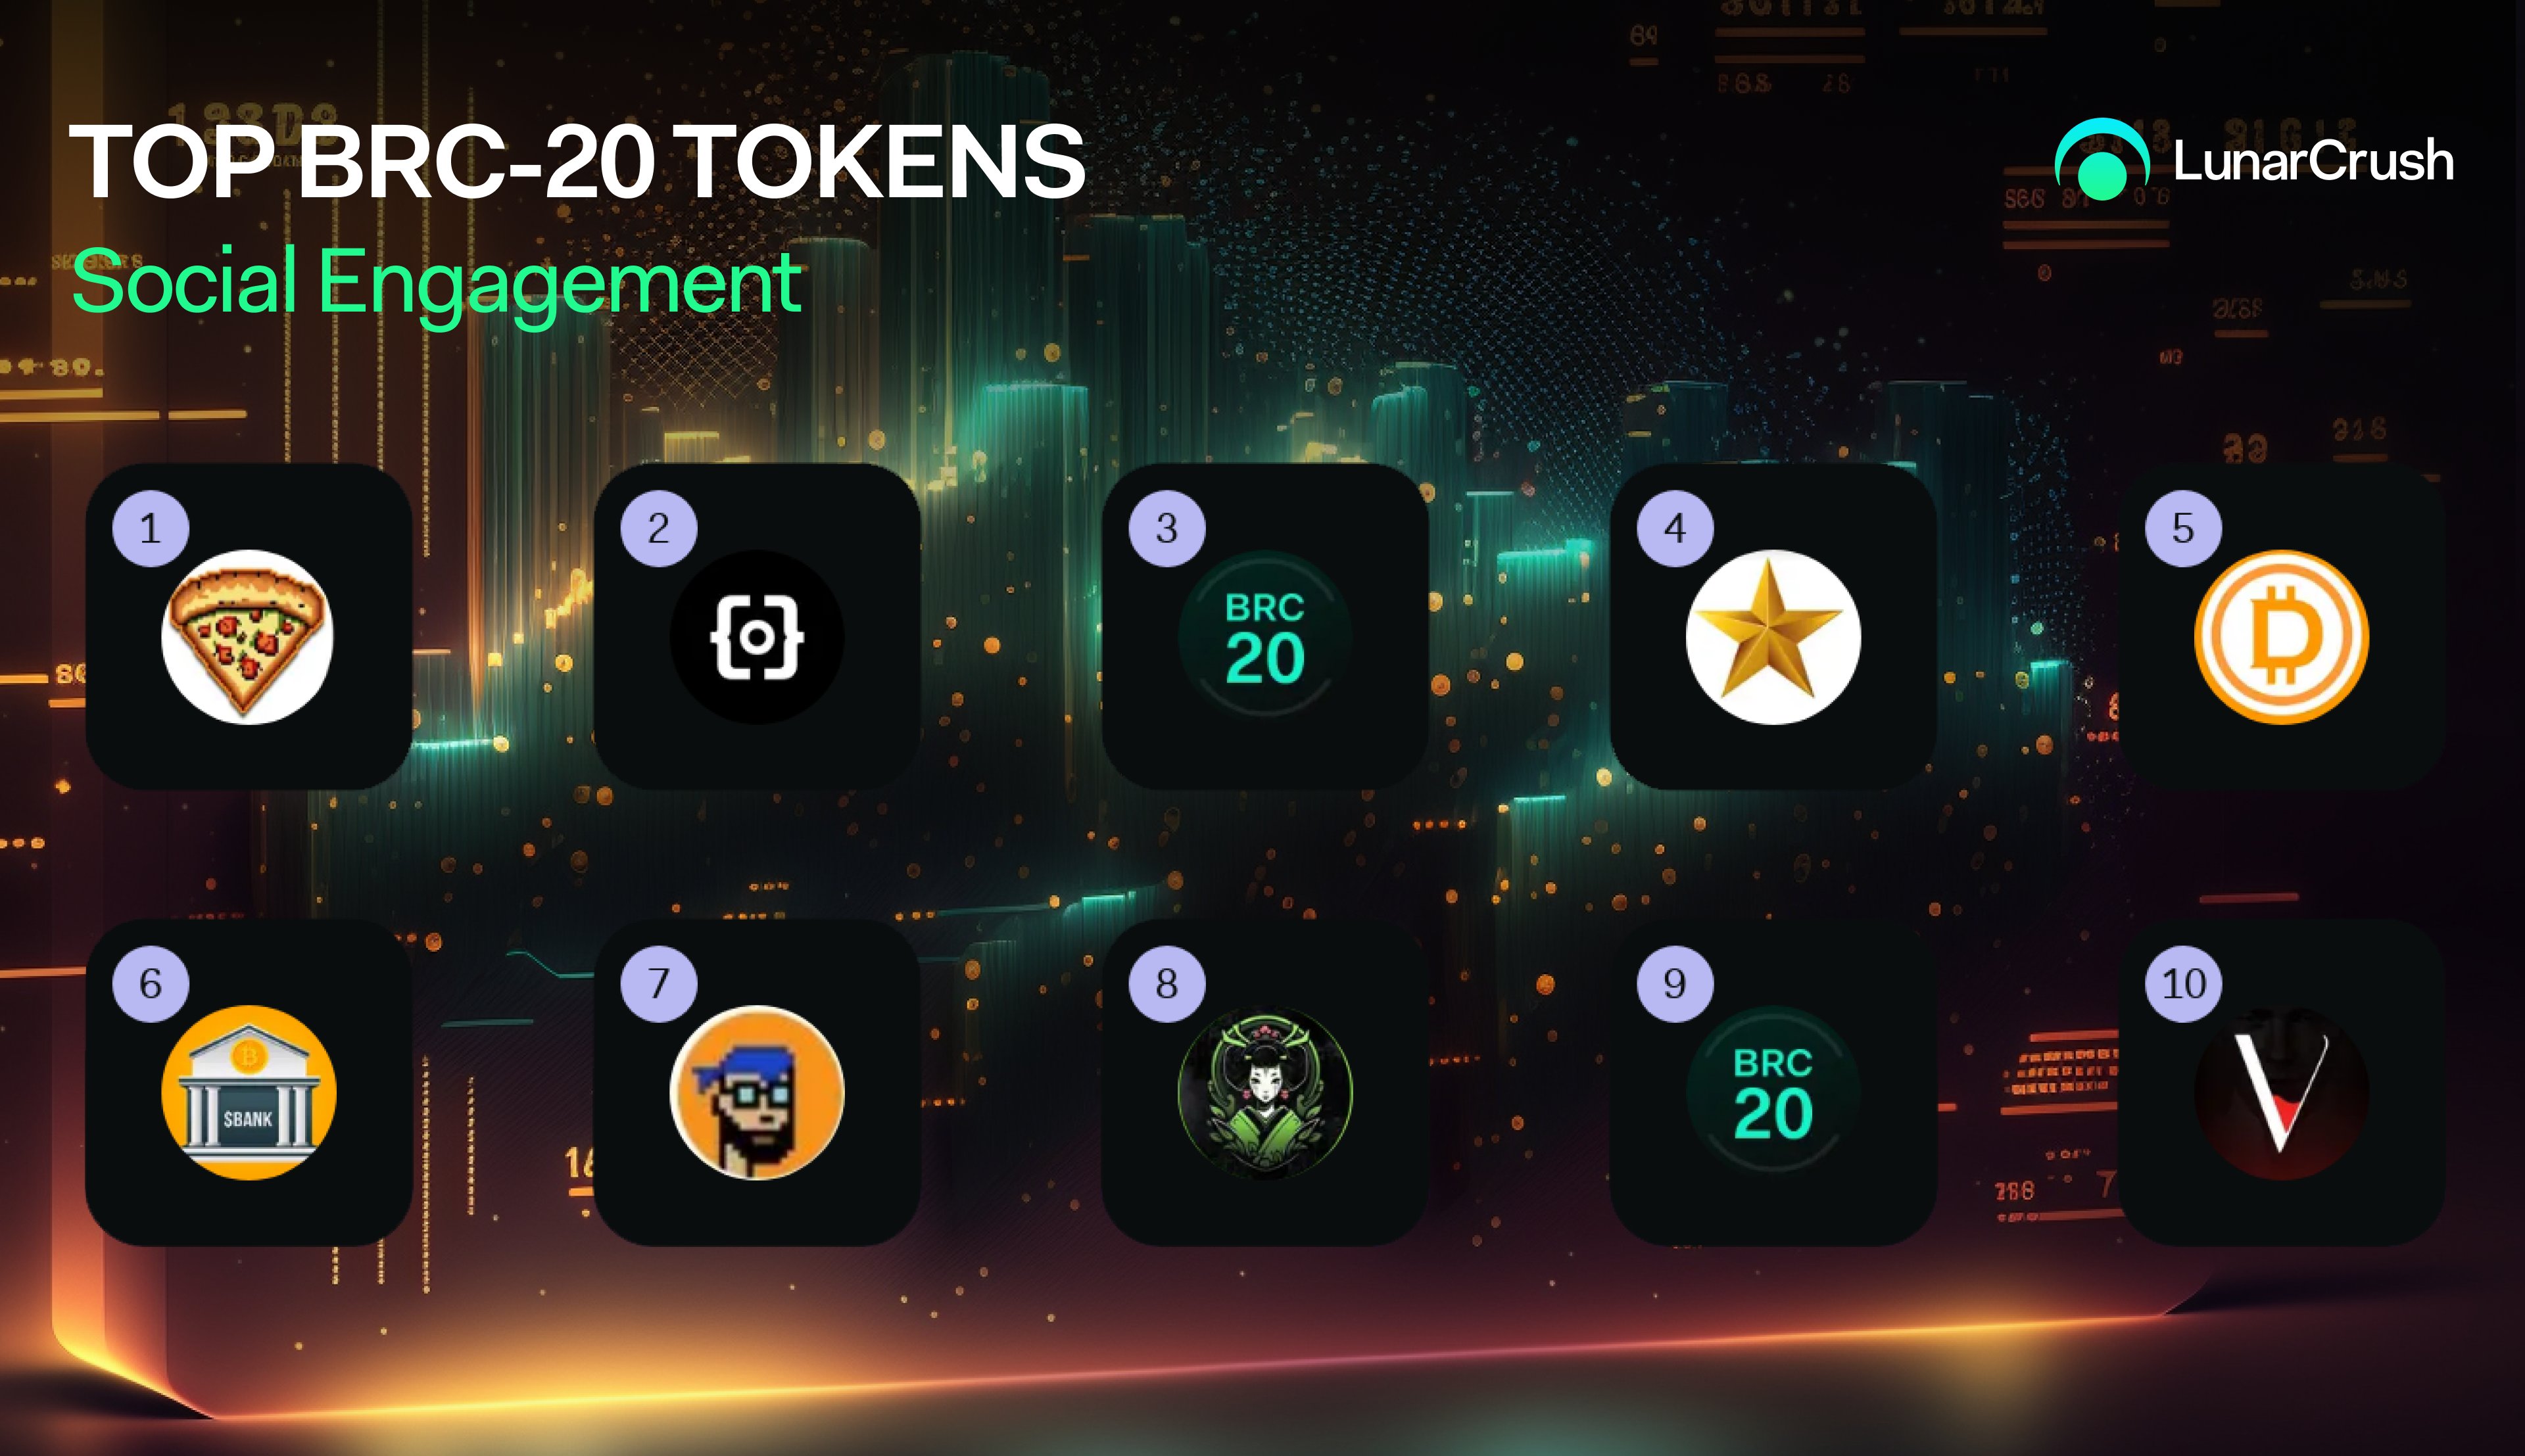 Current top BRC-20 tokens by social engagements, indicating active community participation within social posts....